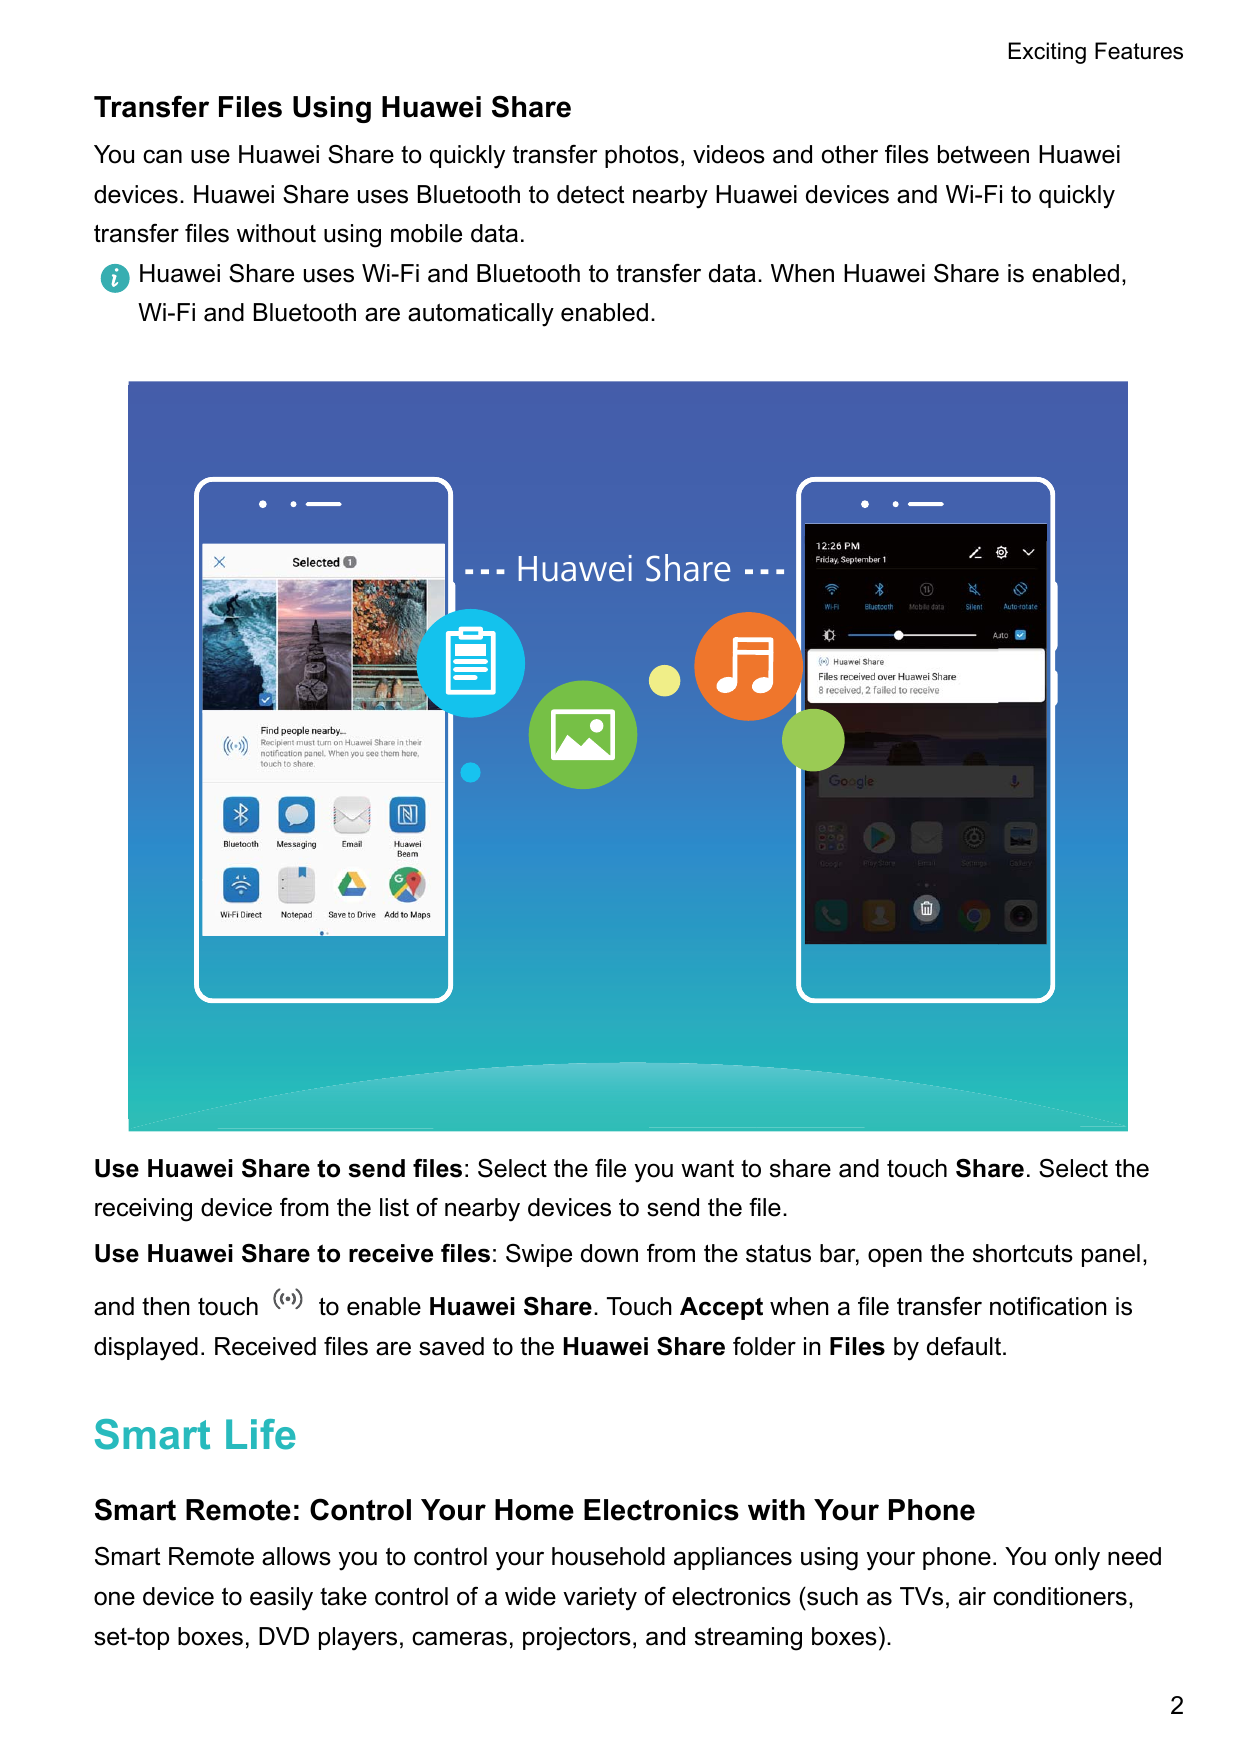 Exciting FeaturesTransfer Files Using Huawei ShareYou can use Huawei Share to quickly transfer photos, videos and other files be